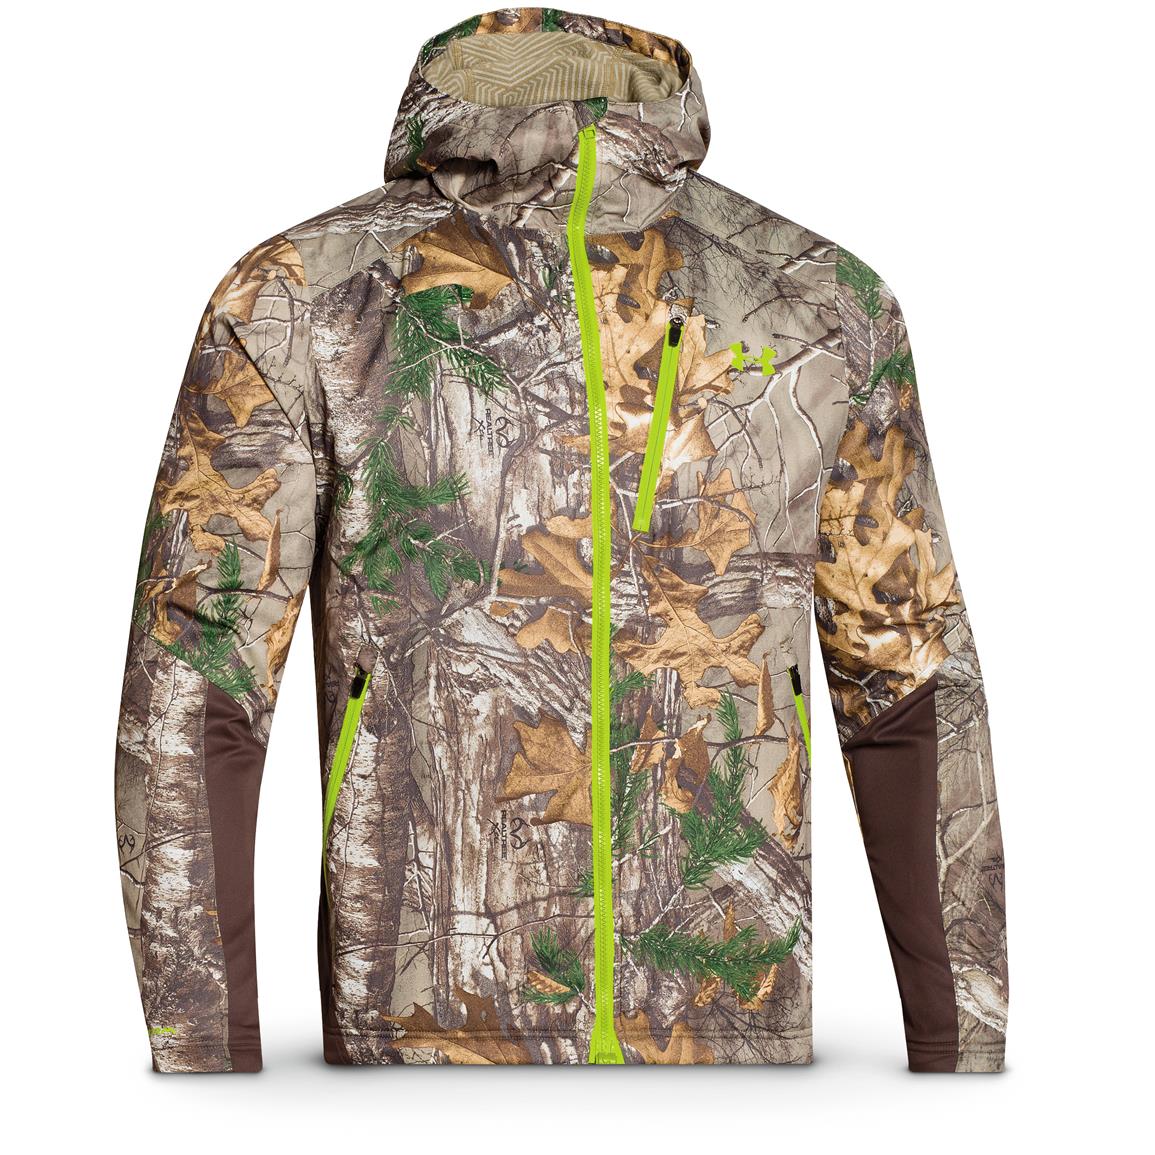 Under Armour Max-4 HD Realtree Storm Coldgear Hunting Jacket Men’s Large New 